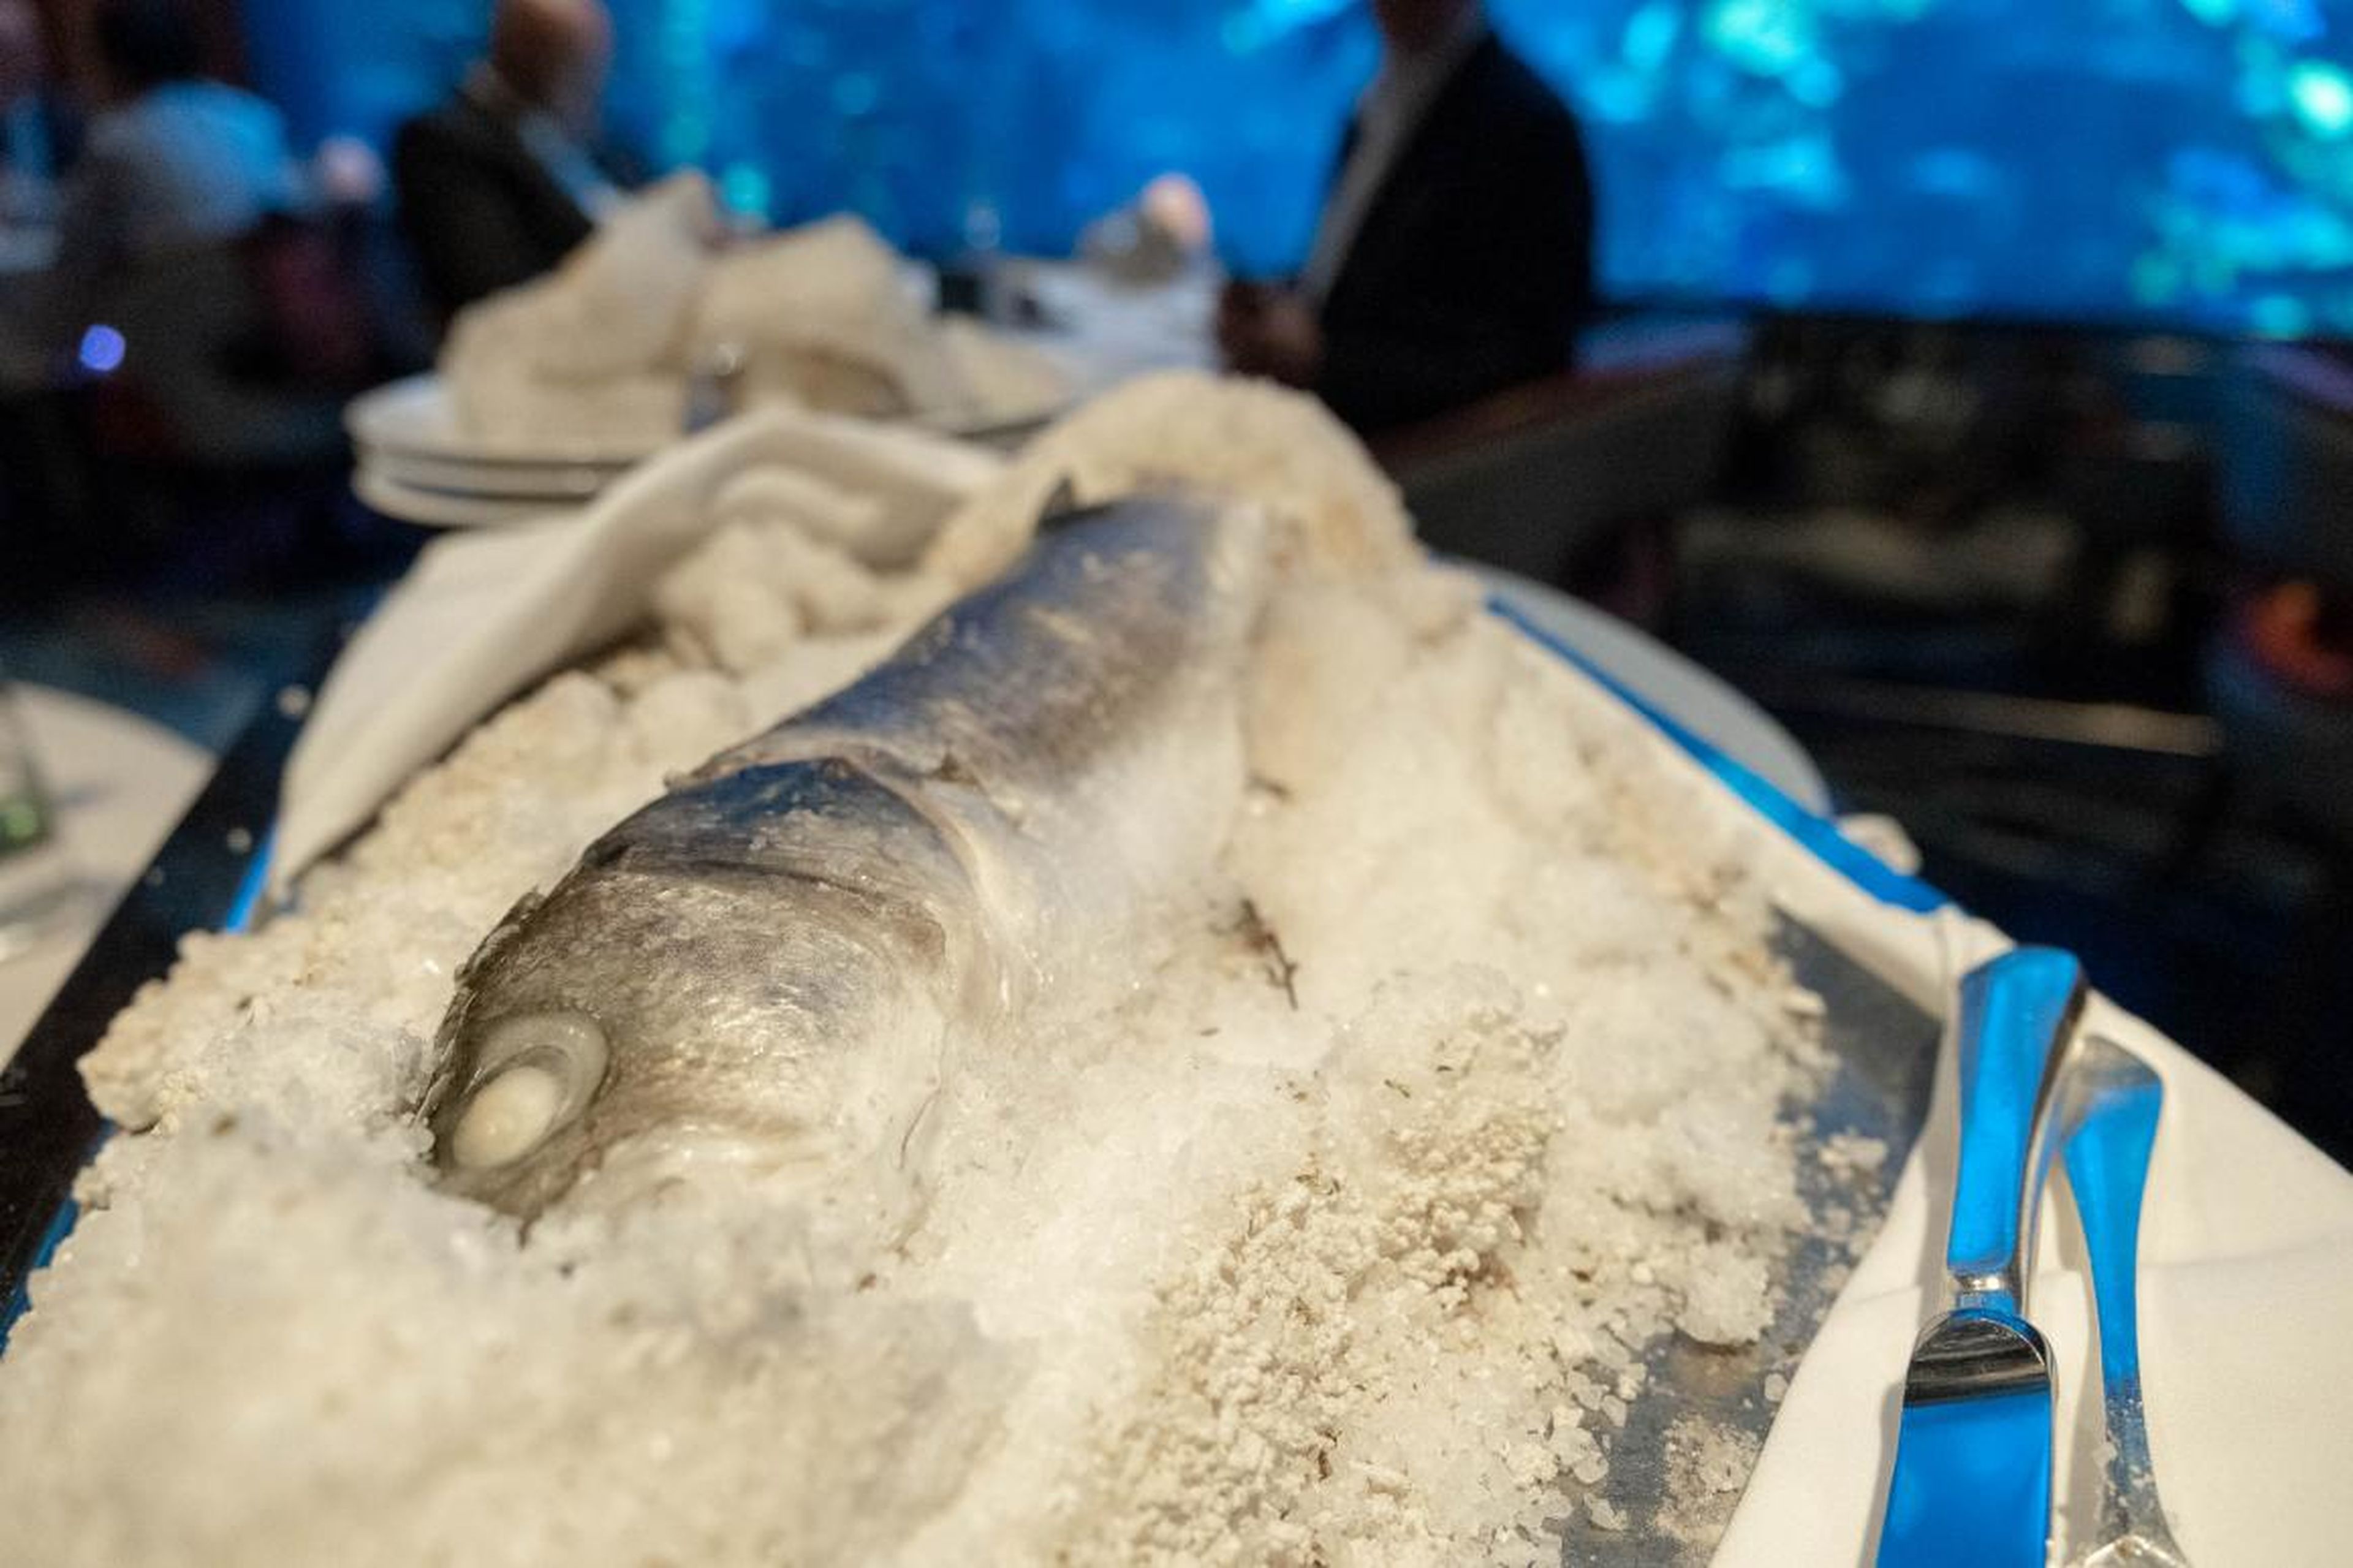 The main courses find the pared-back footing. The salt-baked whole sea bass (980 AED, or $266) is both simple and theatrical, arriving encased in salt and filleted table-side. The fish is as fresh and tender as you'd expect from a